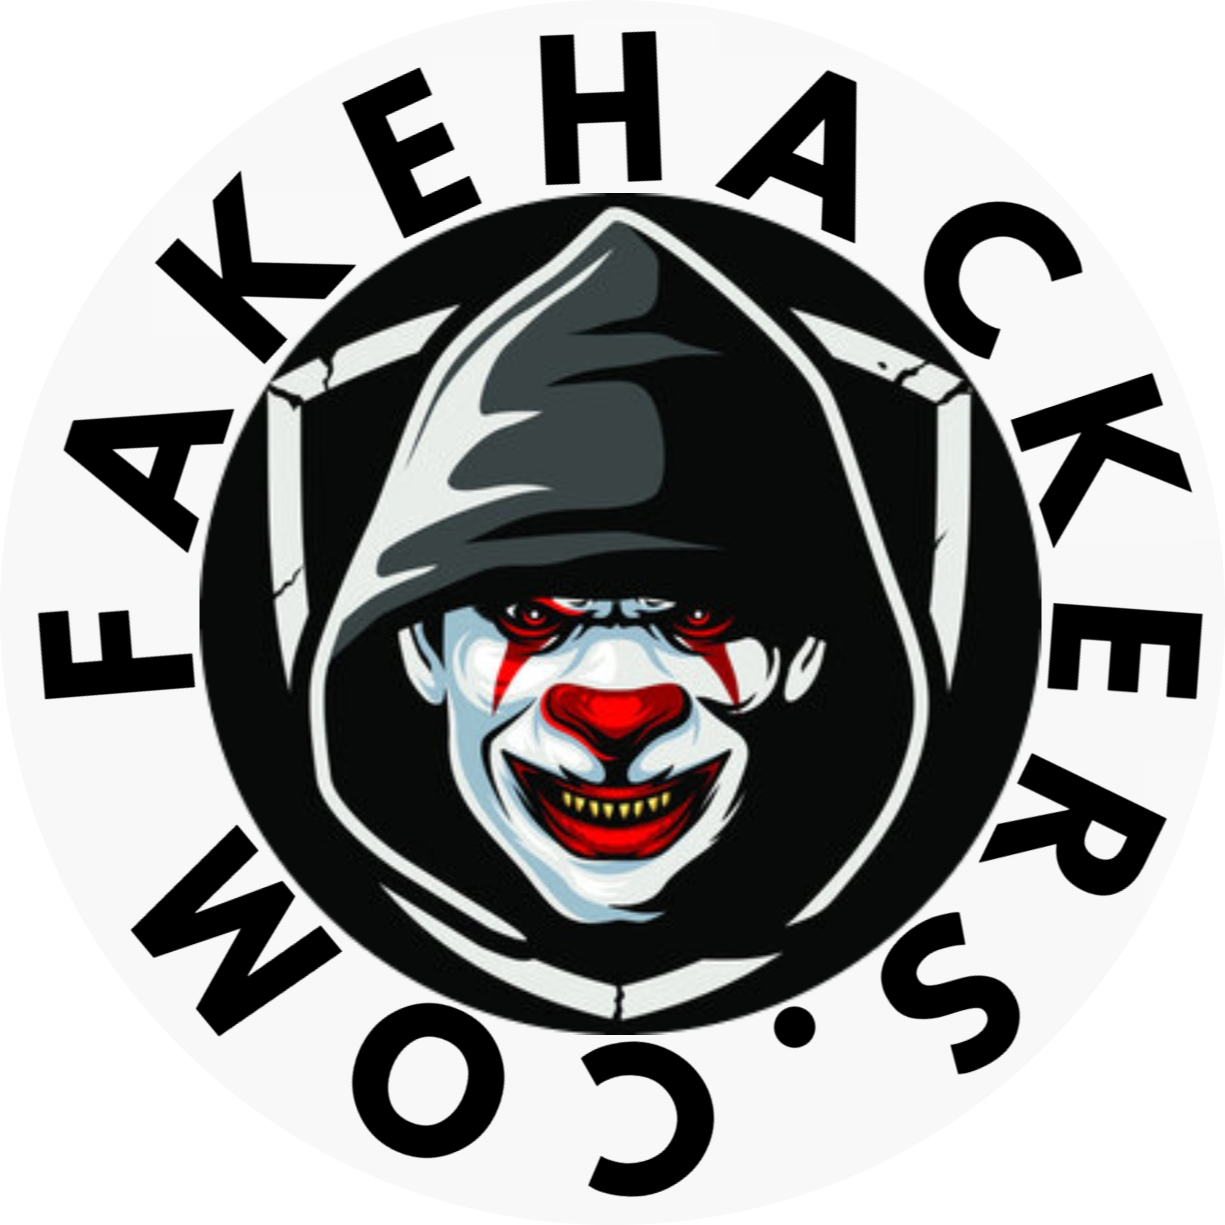 Fake Hacker Scams. Don't Get Hacked by a Fake Hacker: FakeHackers.com Exposes Imposters